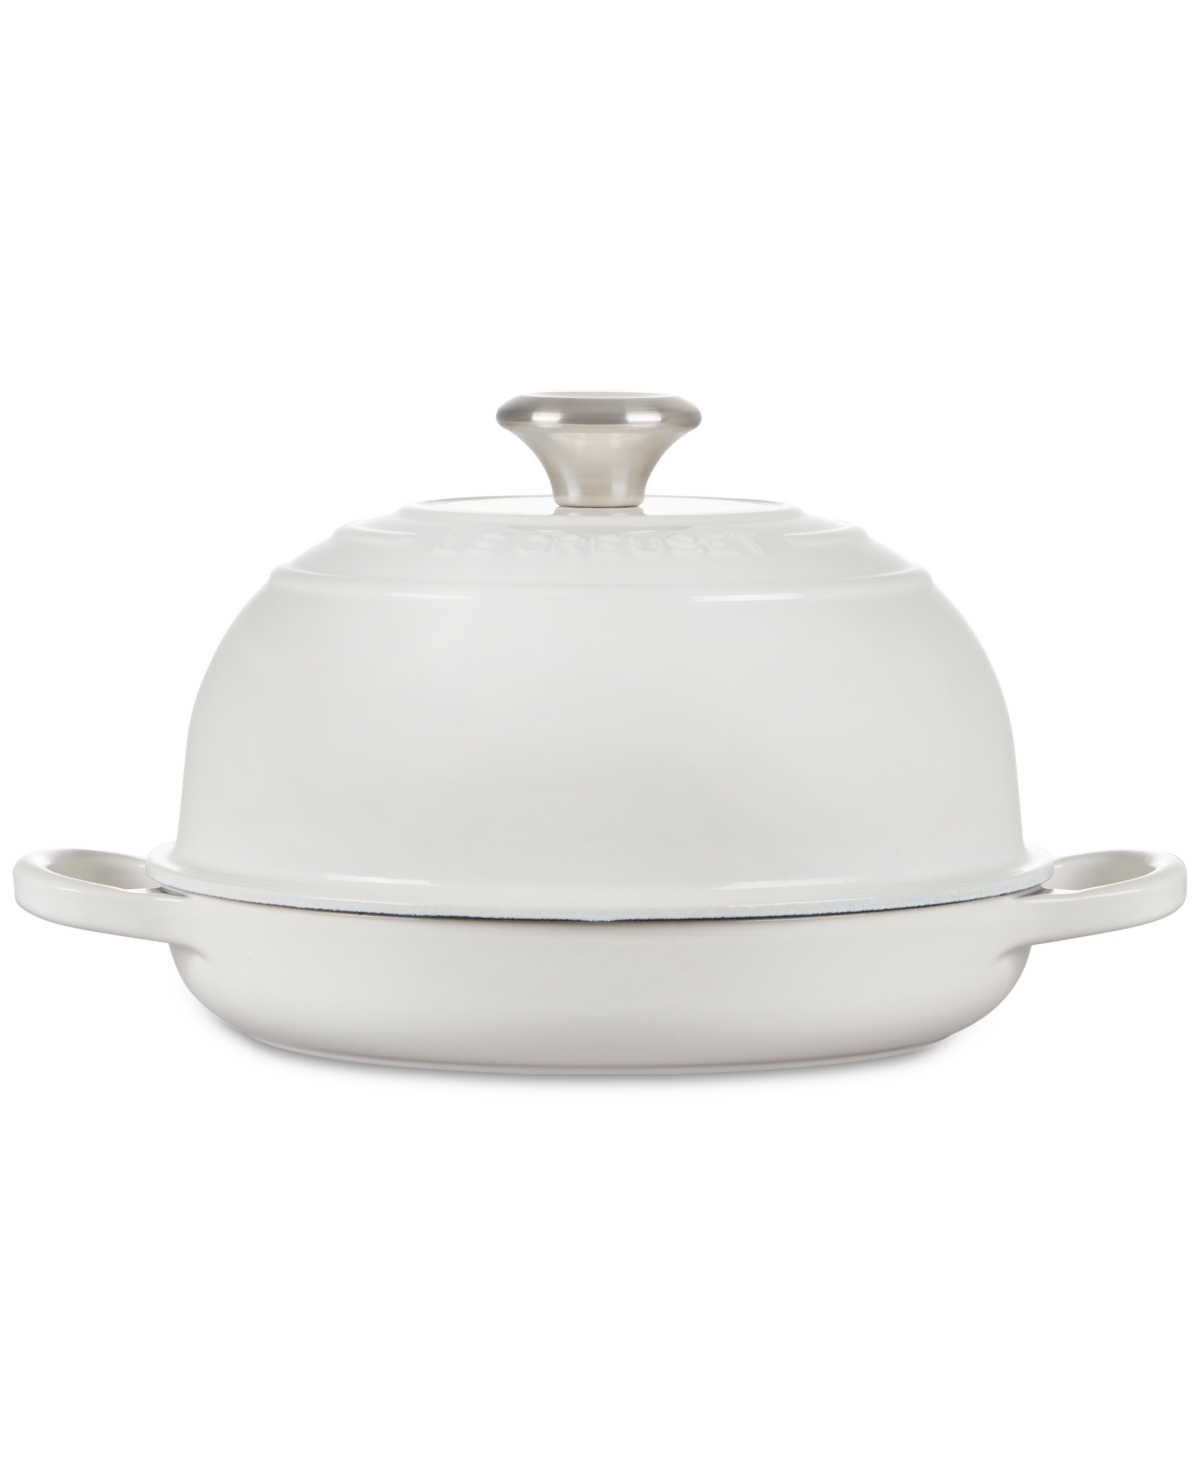 Le Creuset 1.75 Qt Enameled Cast Iron Bread Oven With Lid In White